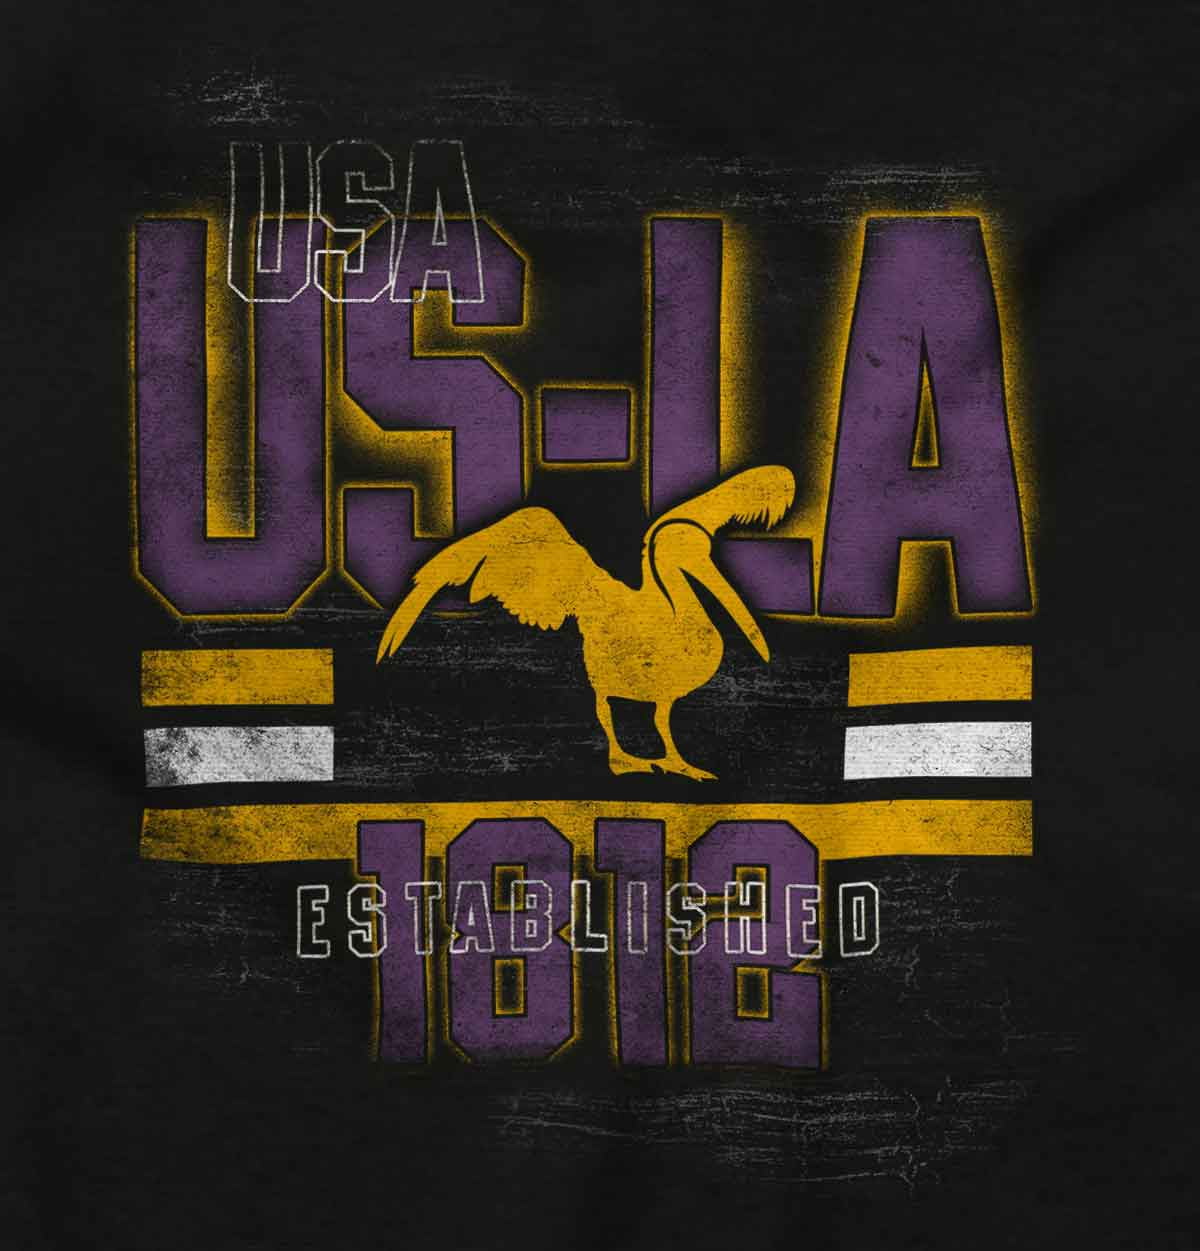 Louisiana Pelican State Cool Vintage Men's Graphic T Shirt Tees Brisco Brands S, Adult Unisex, Size: Small, Gold